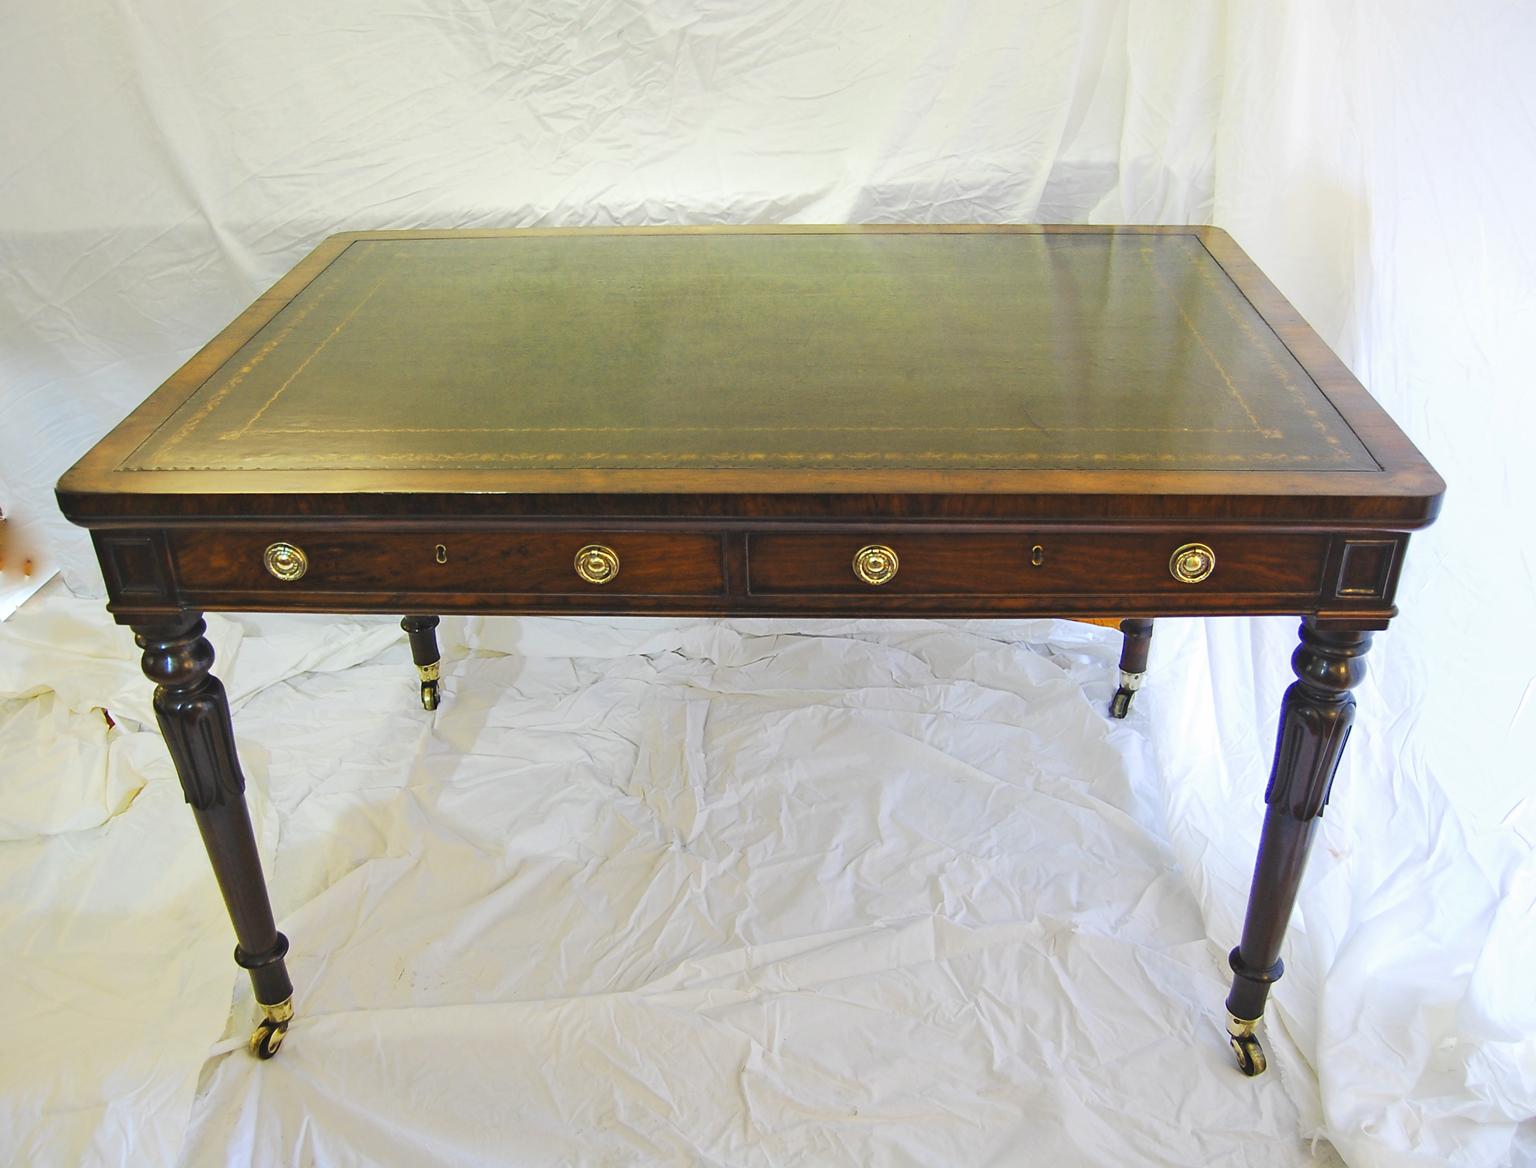   English William IV rosewood writing table with replaced hand tooled and hand dyed antique green leather.  This writing table is nicely detailed using high quality timber and a fine craftsman did the carving on the legs    This desk can be free